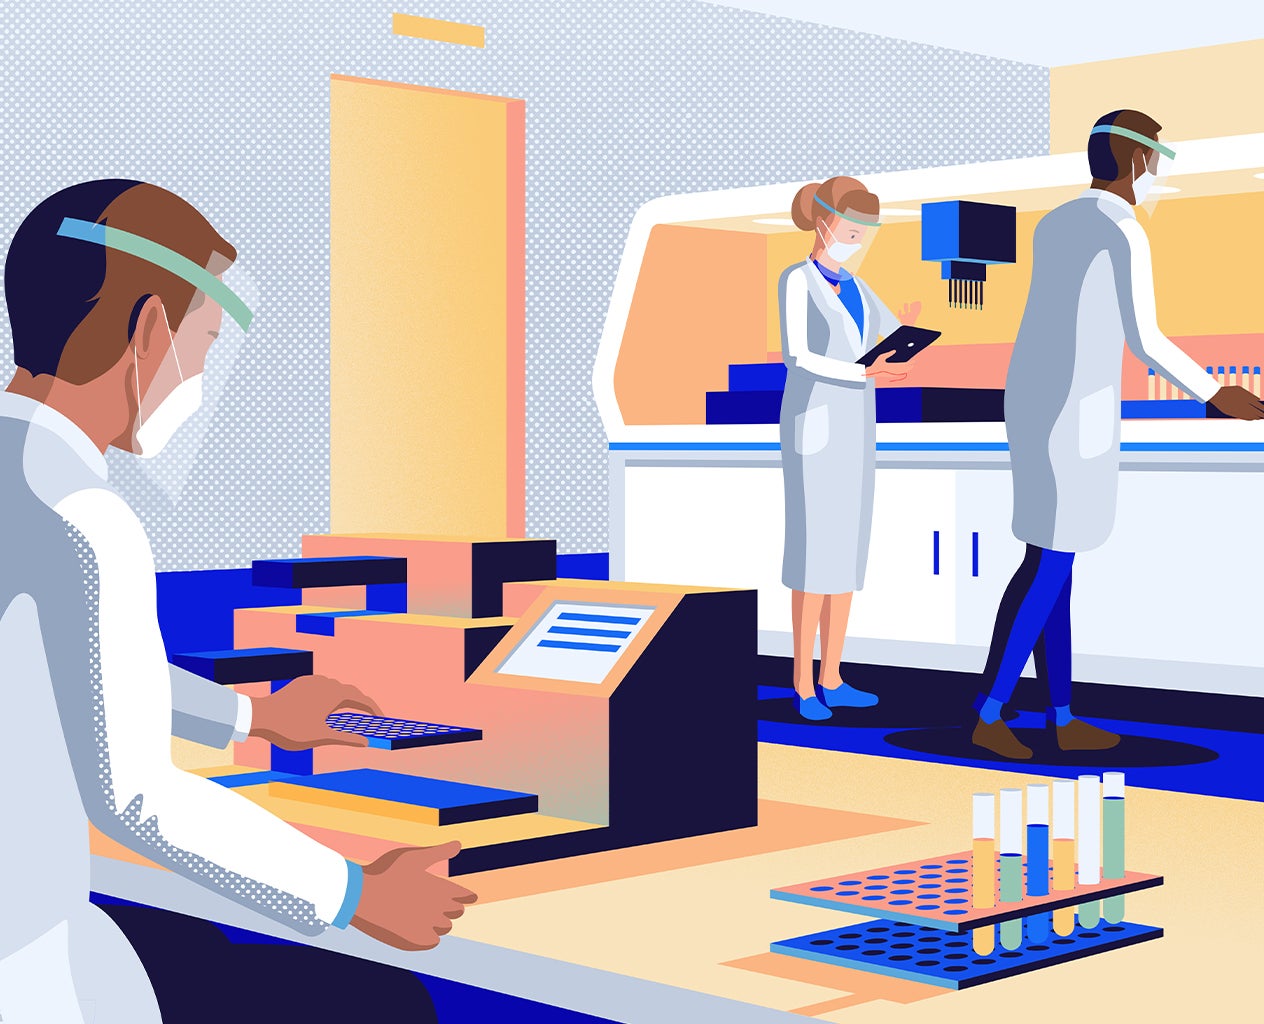 Illustration of Doctors with Coats in a Lab